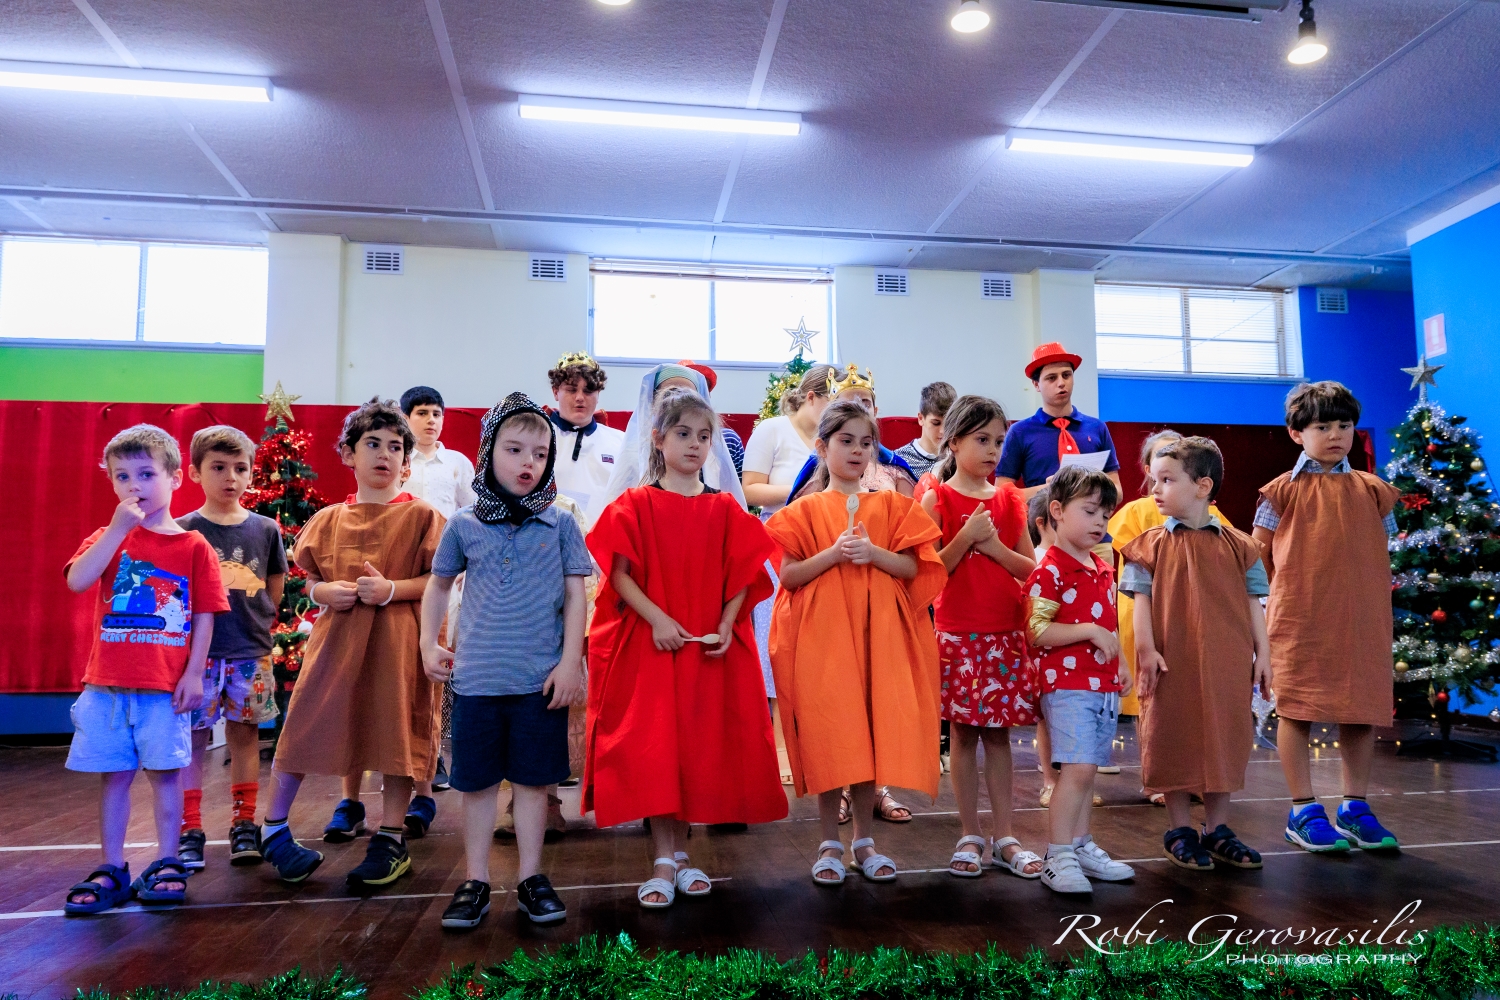 Perth: Christmas Luncheon and Sunday School Performance at Sts Constantine and Helene